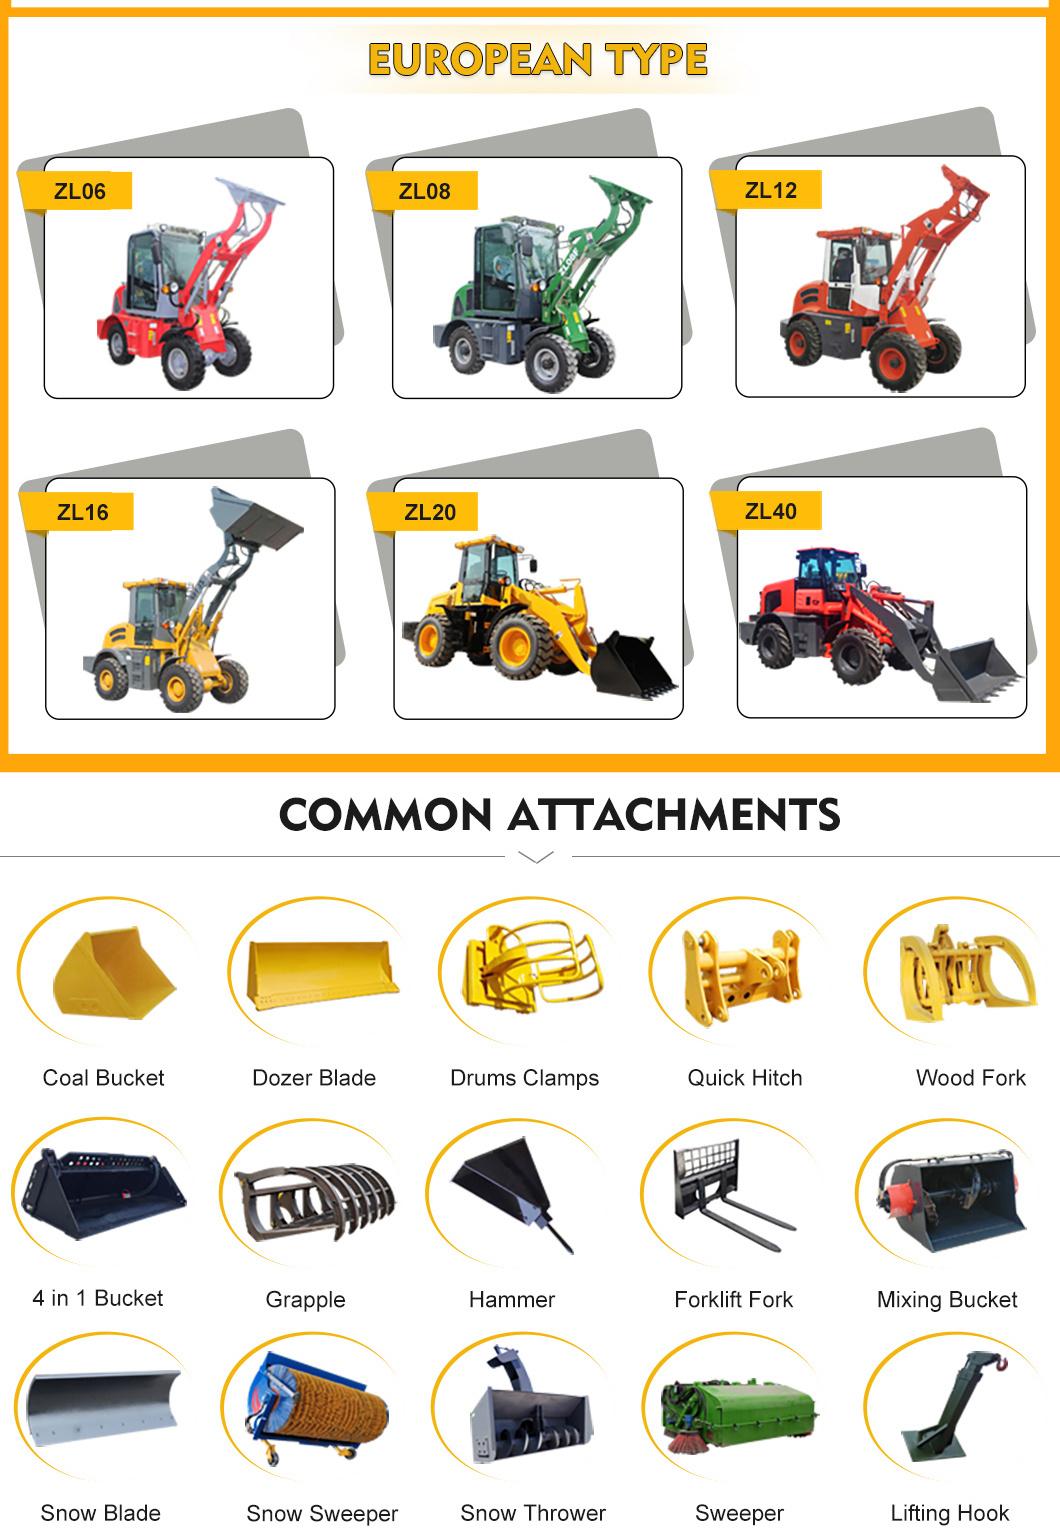 Sturdy Structure Durable Wheel Loader 935 930 Front Loader Small Loader List Price